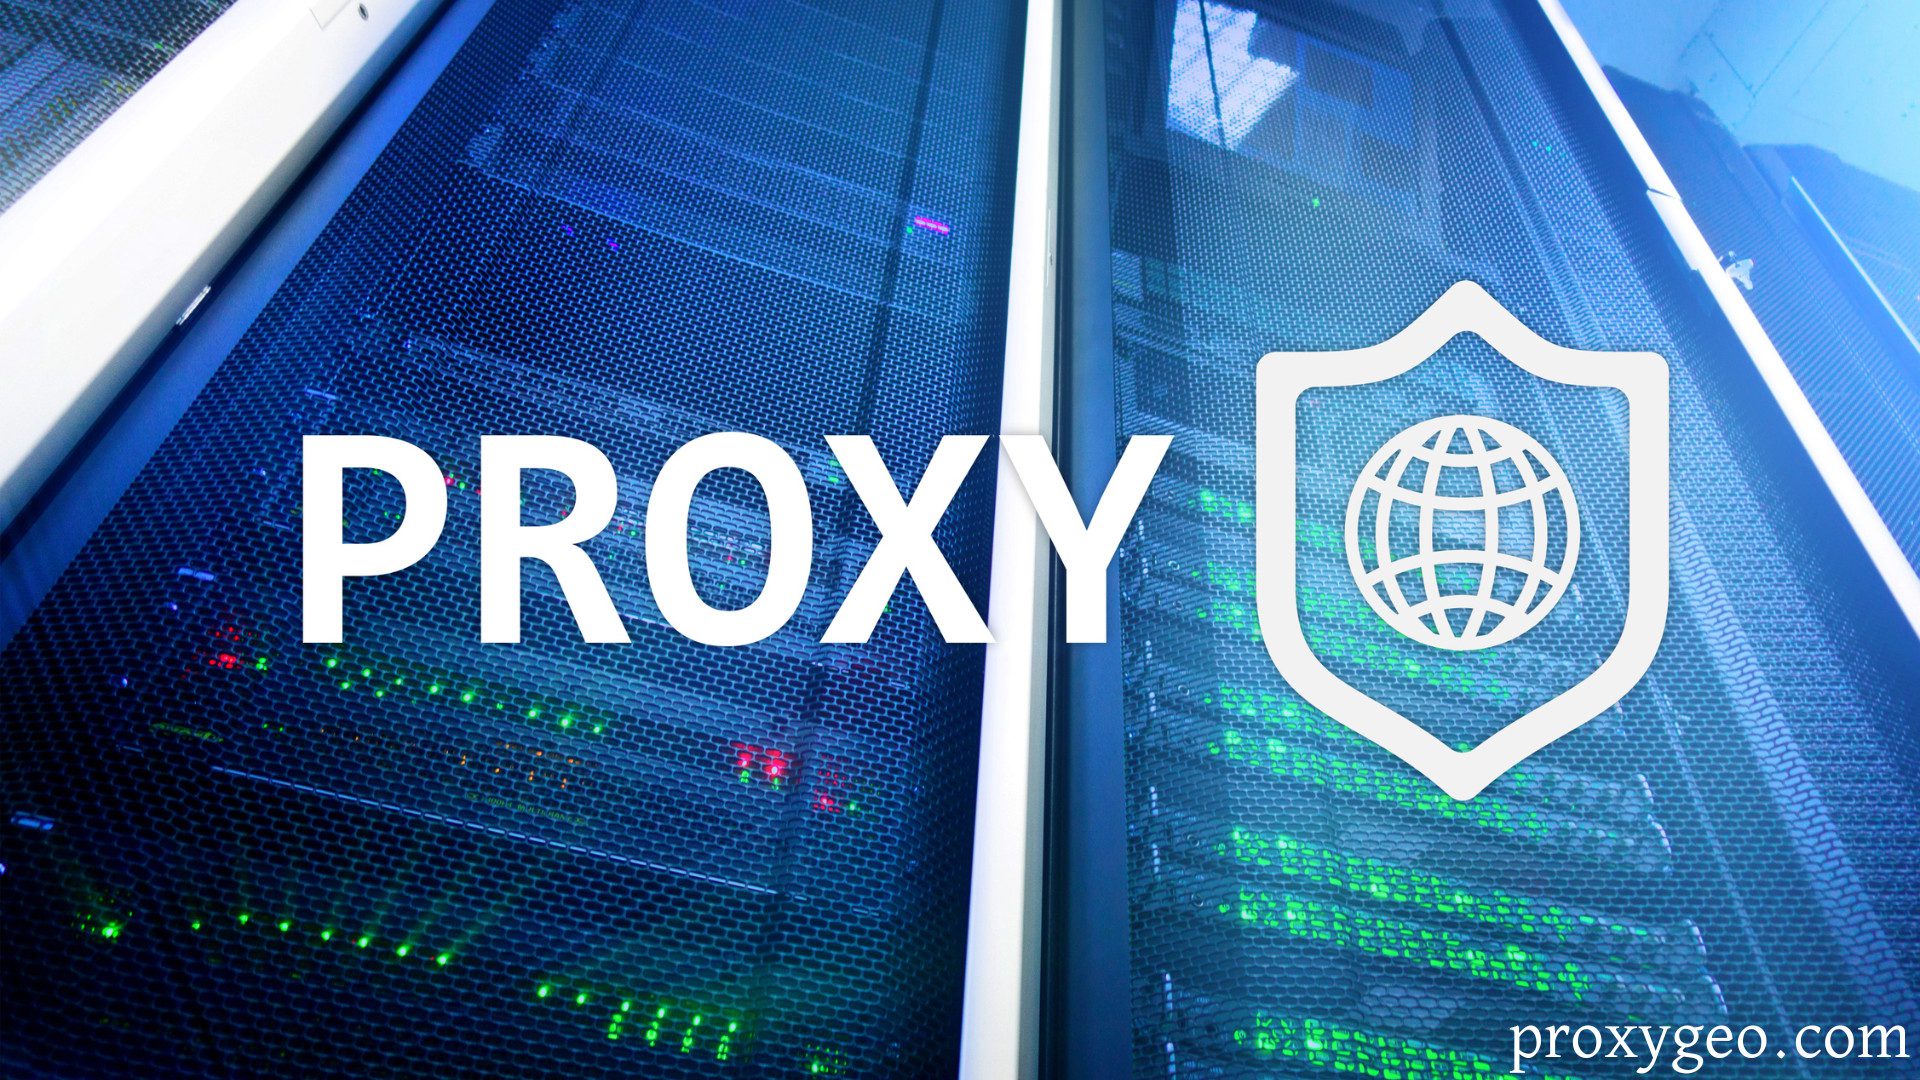 introduction of residential proxies